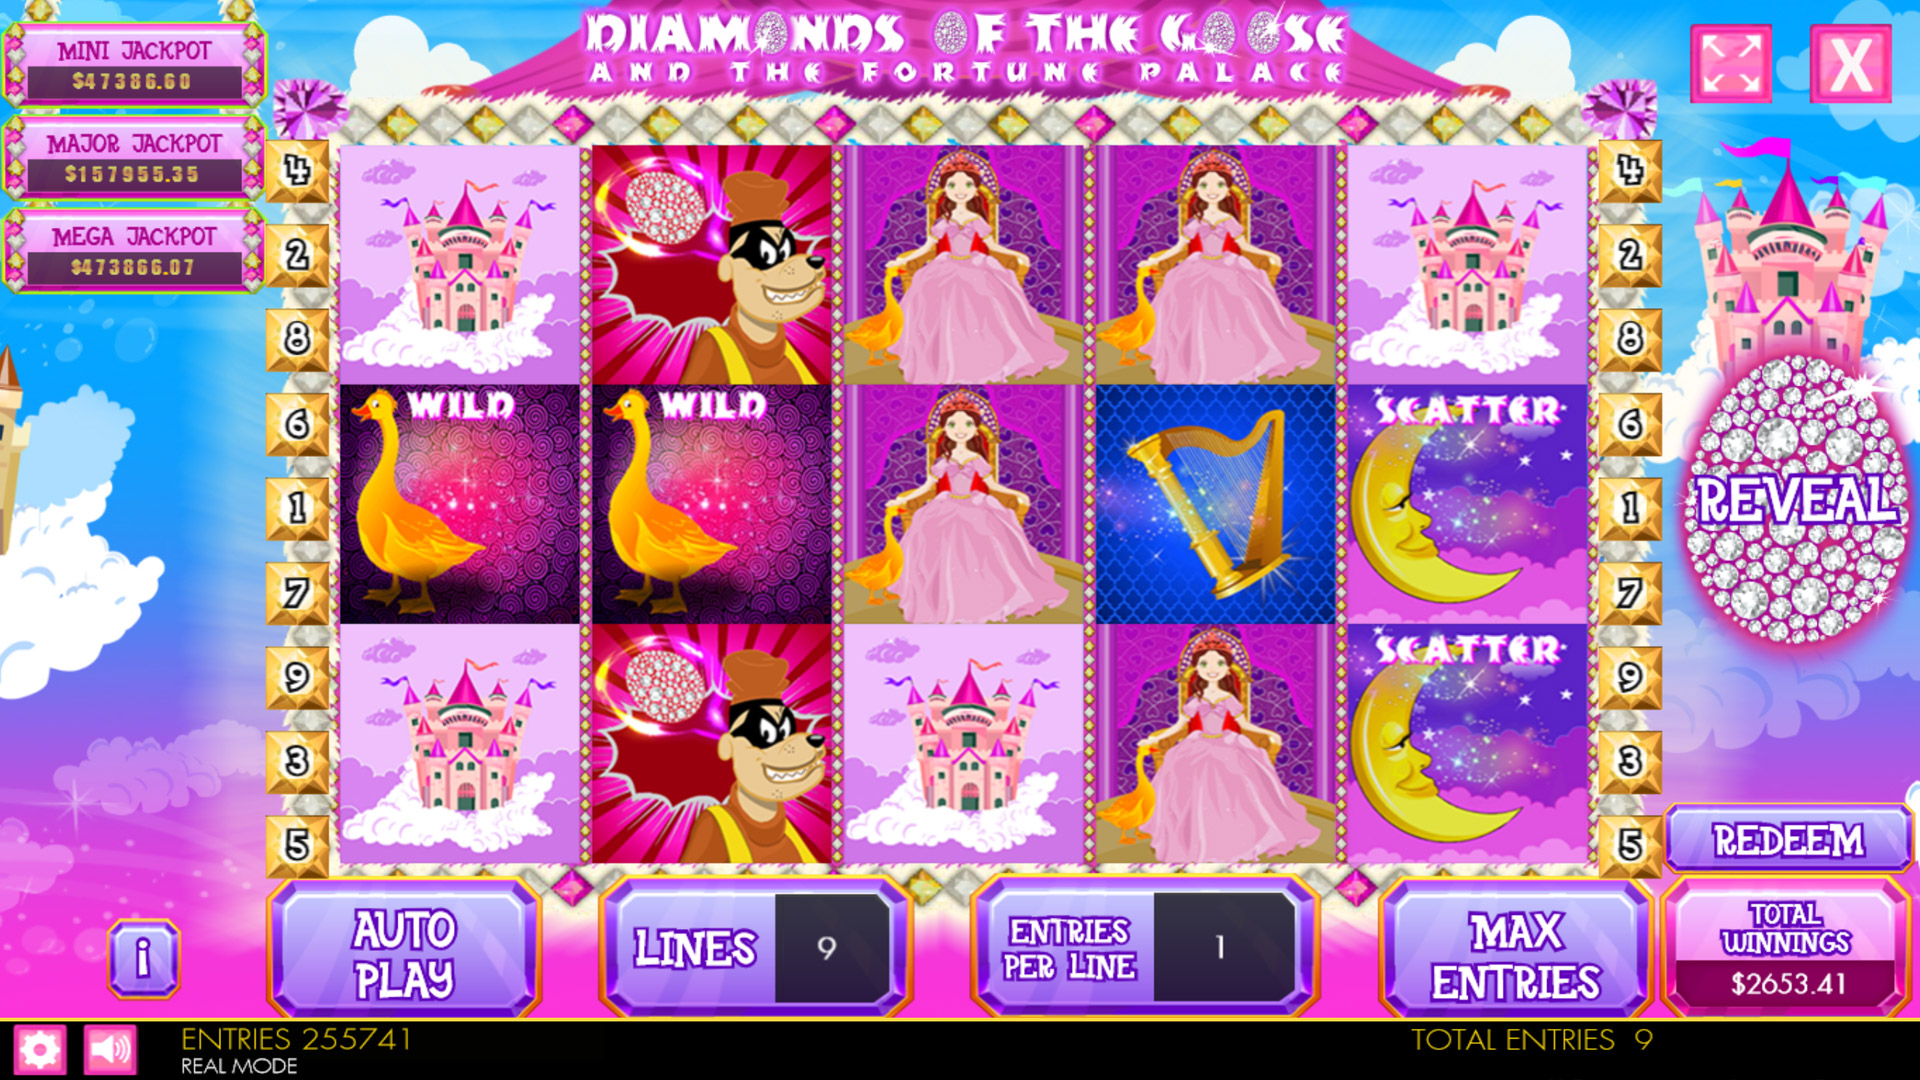 Diamonds of the Goose and The Fortune Palace HTML5 Mobile and PC Preview Pic Main Screen 1